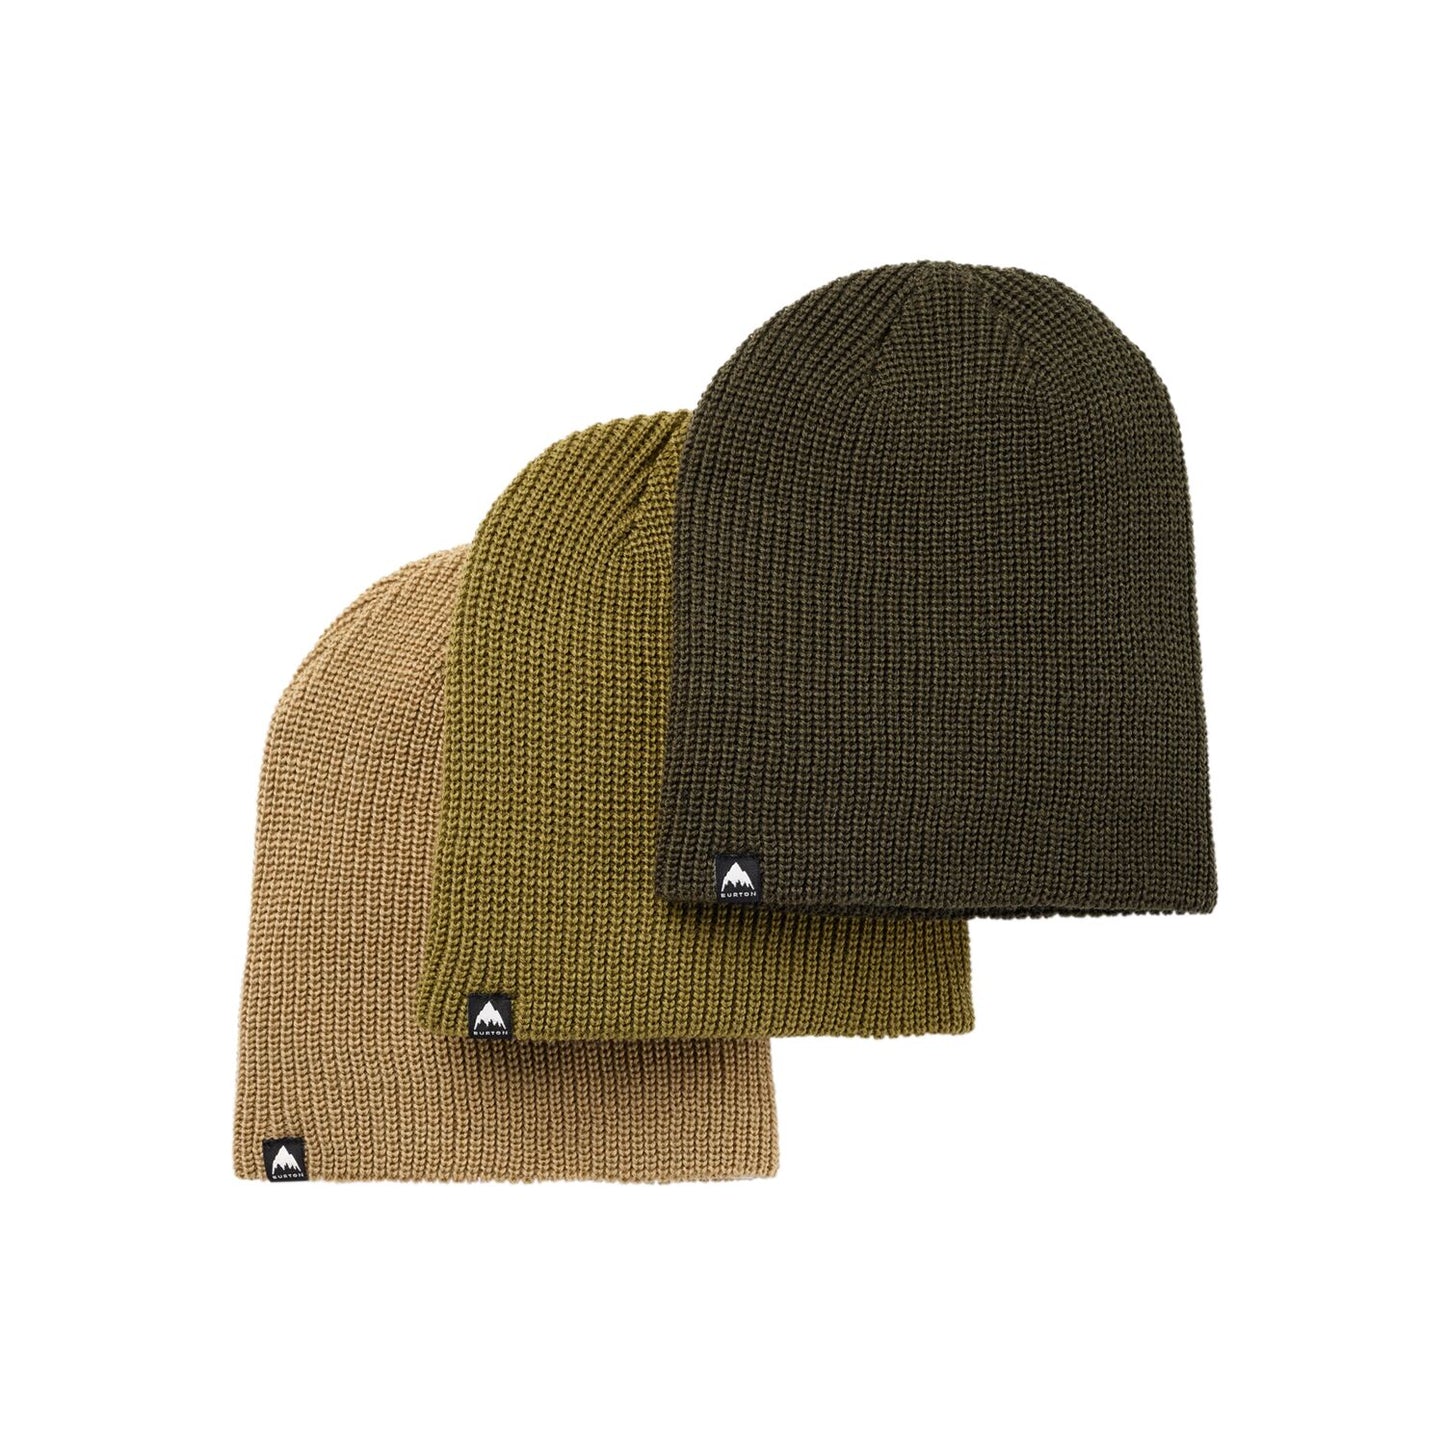 Kids' Burton Recycled DND Beanie - 3 Pack Forest Night Kelp Martini Olive OS Beanies